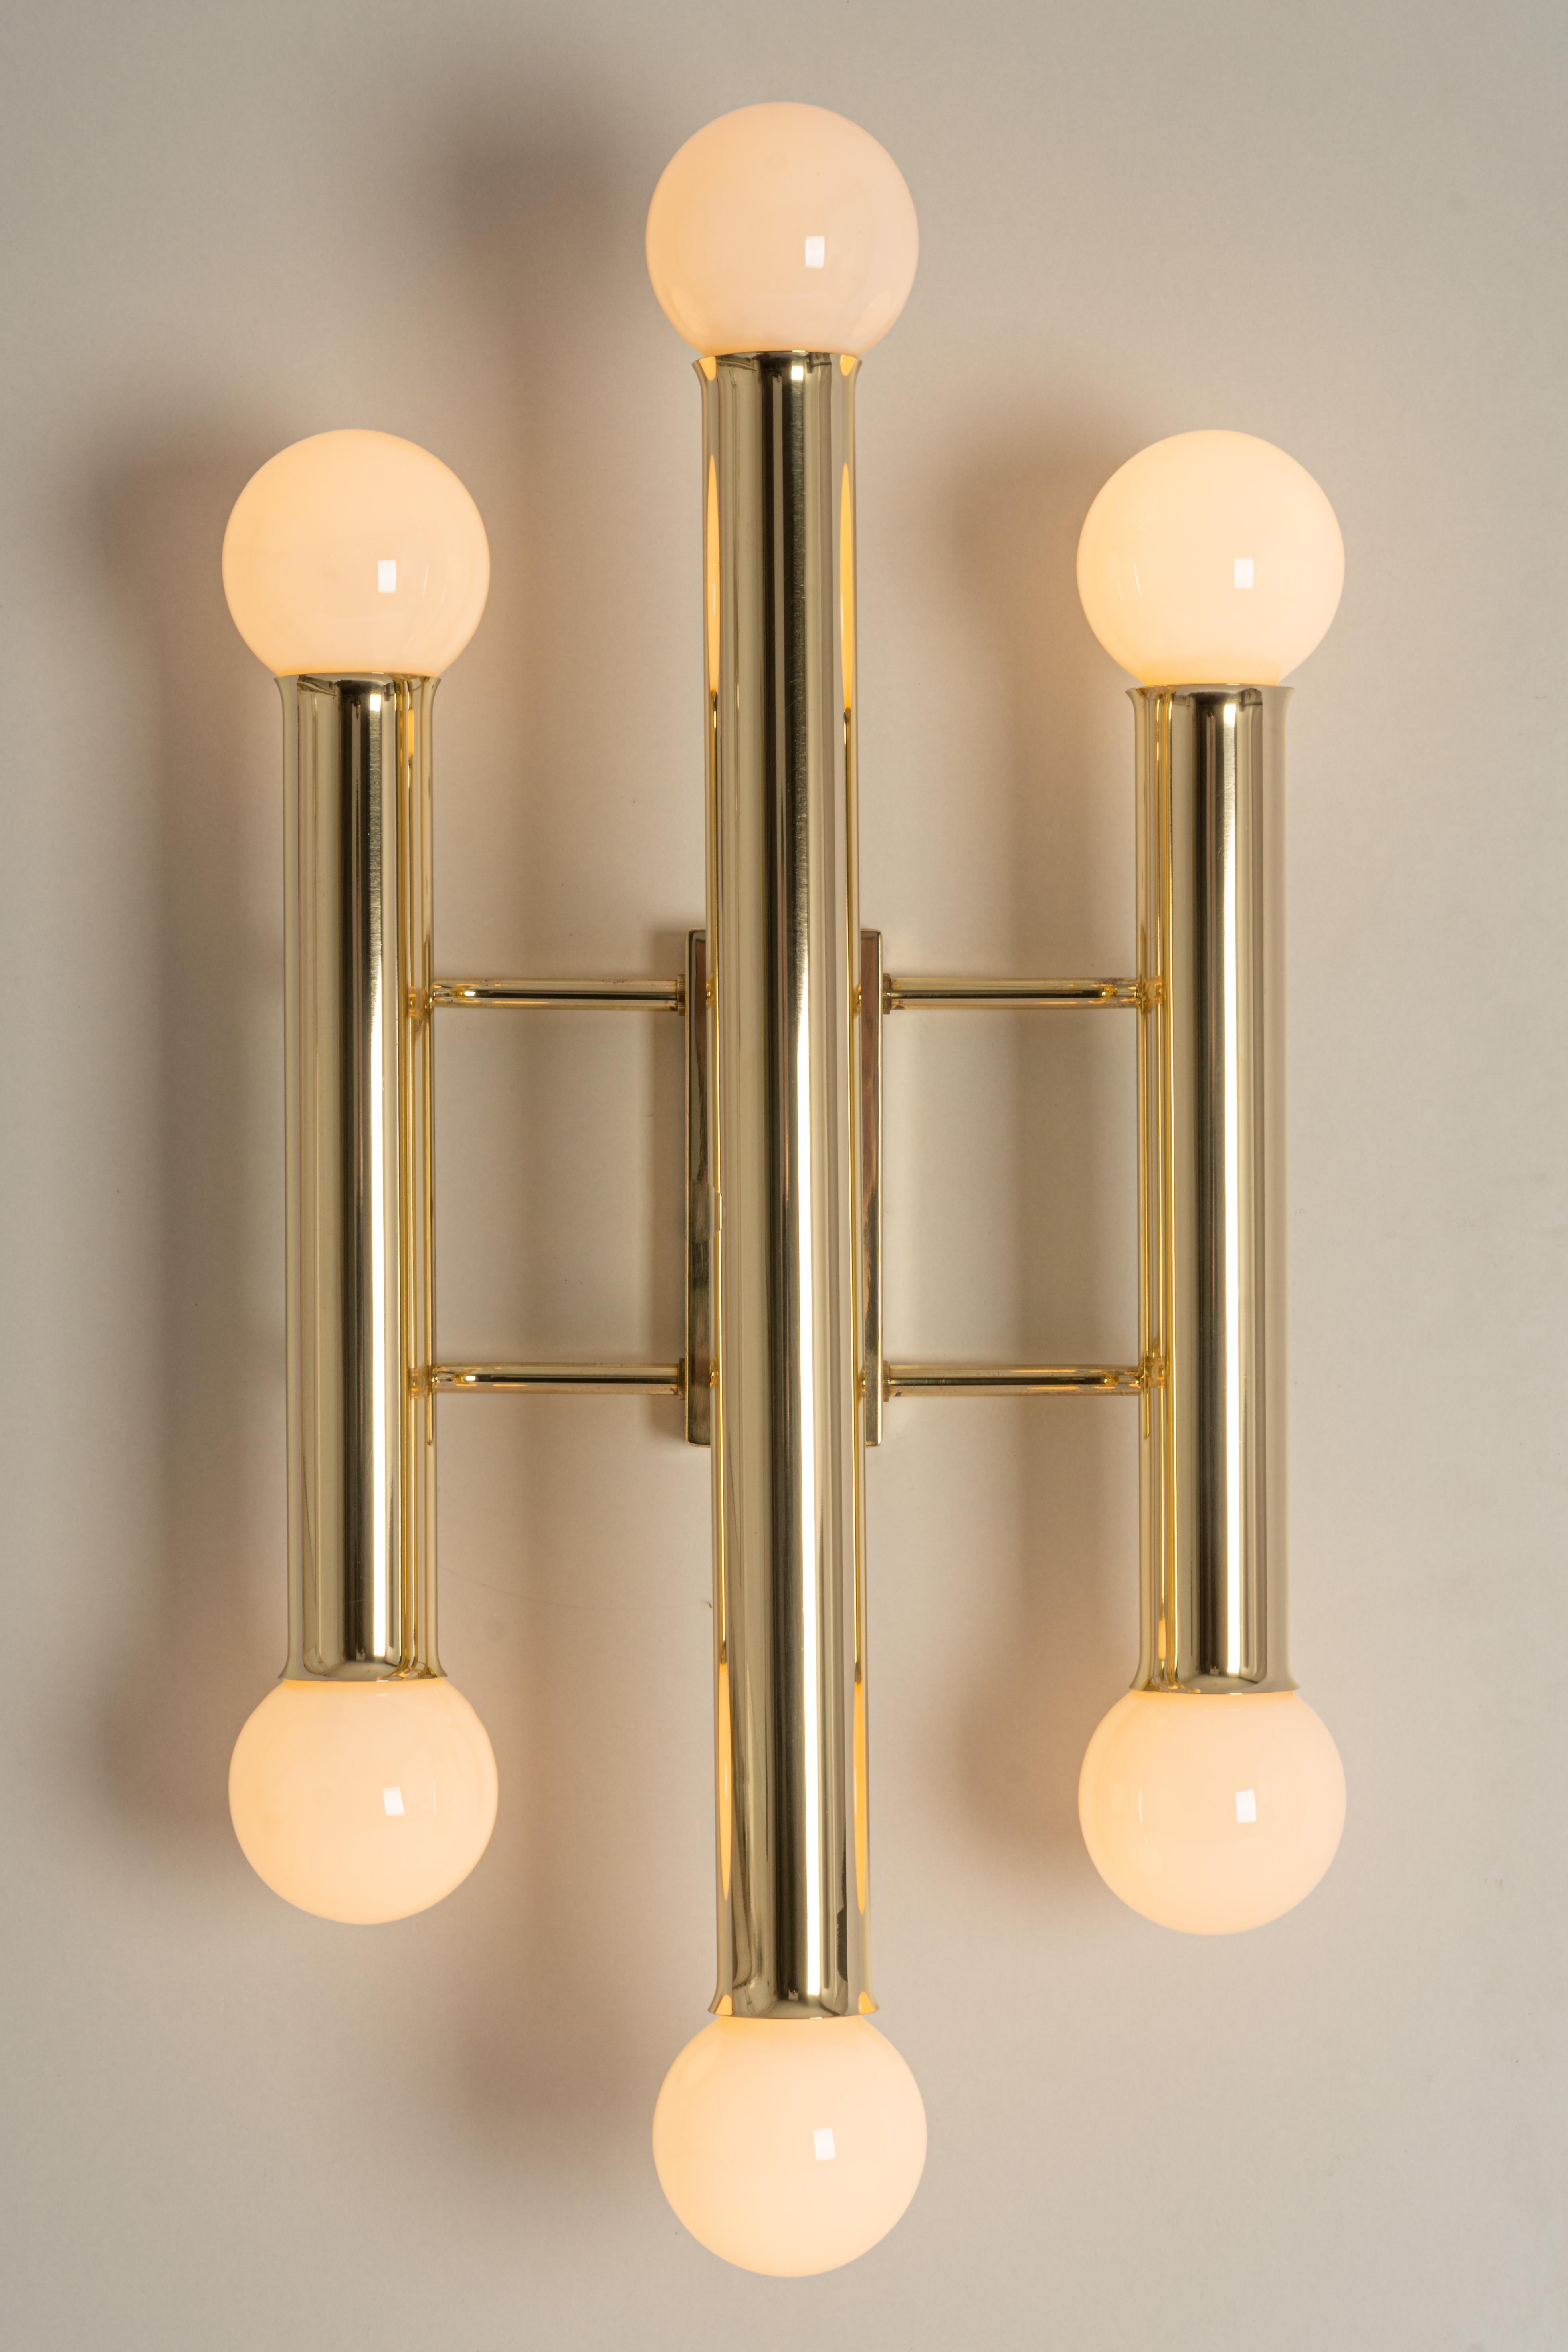 Large Italian Brass Wall Sconce Sciolari Style, 1970s For Sale 1